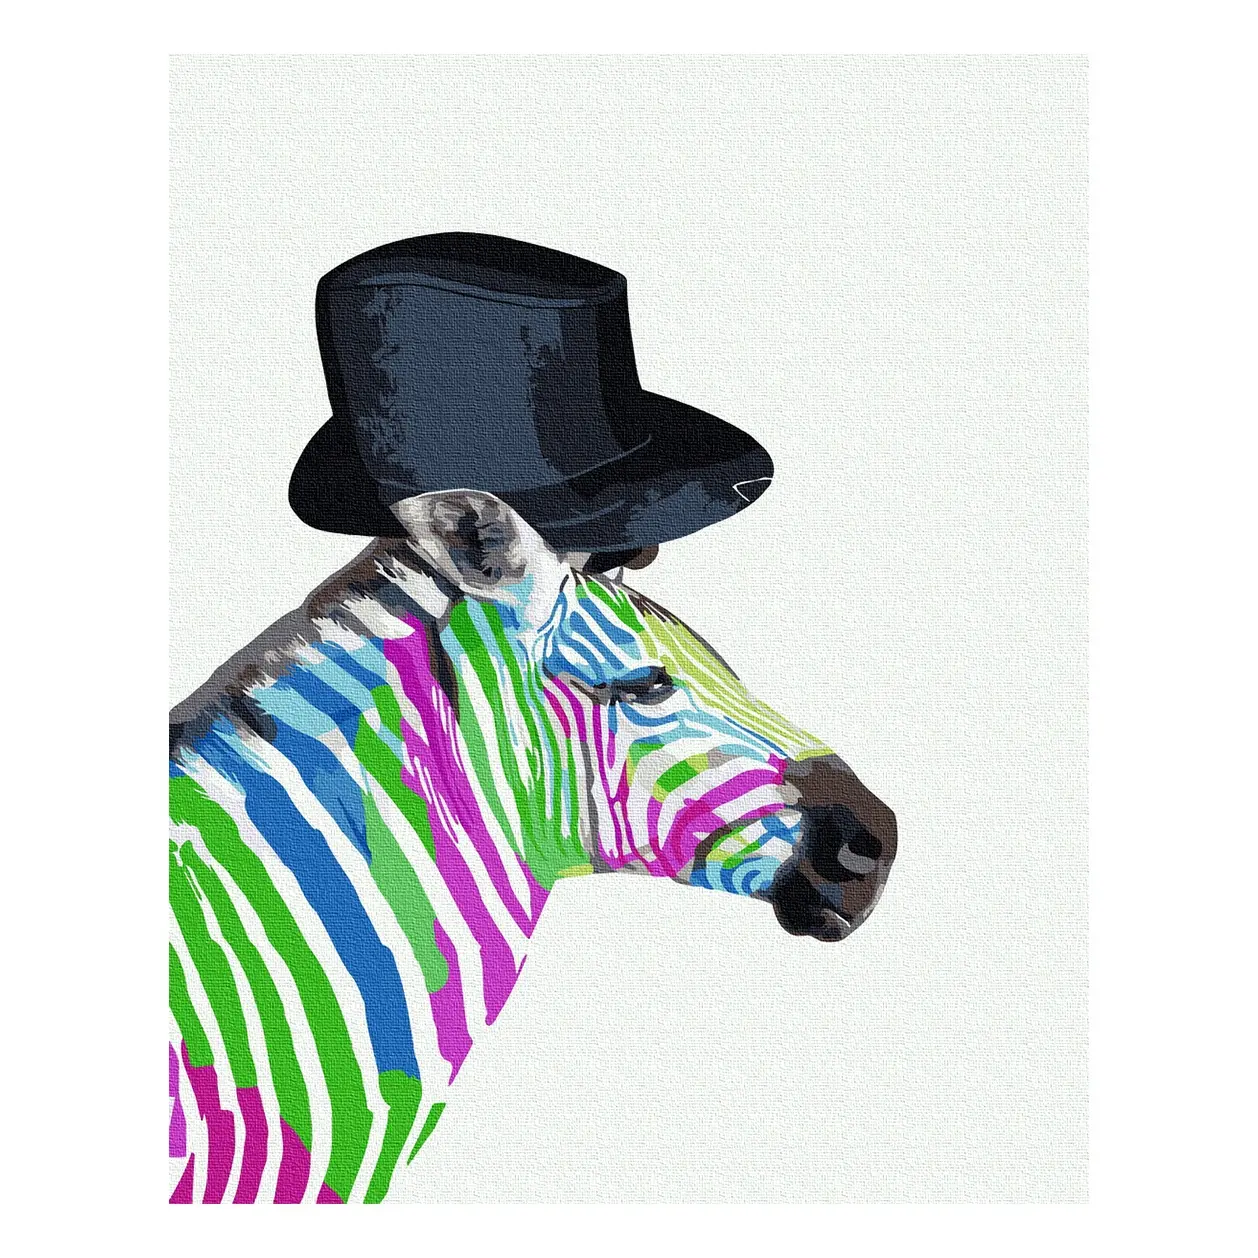 GX9345 Funny decorative oil painting hat animal horse painting creative art style painting by numbers for adult